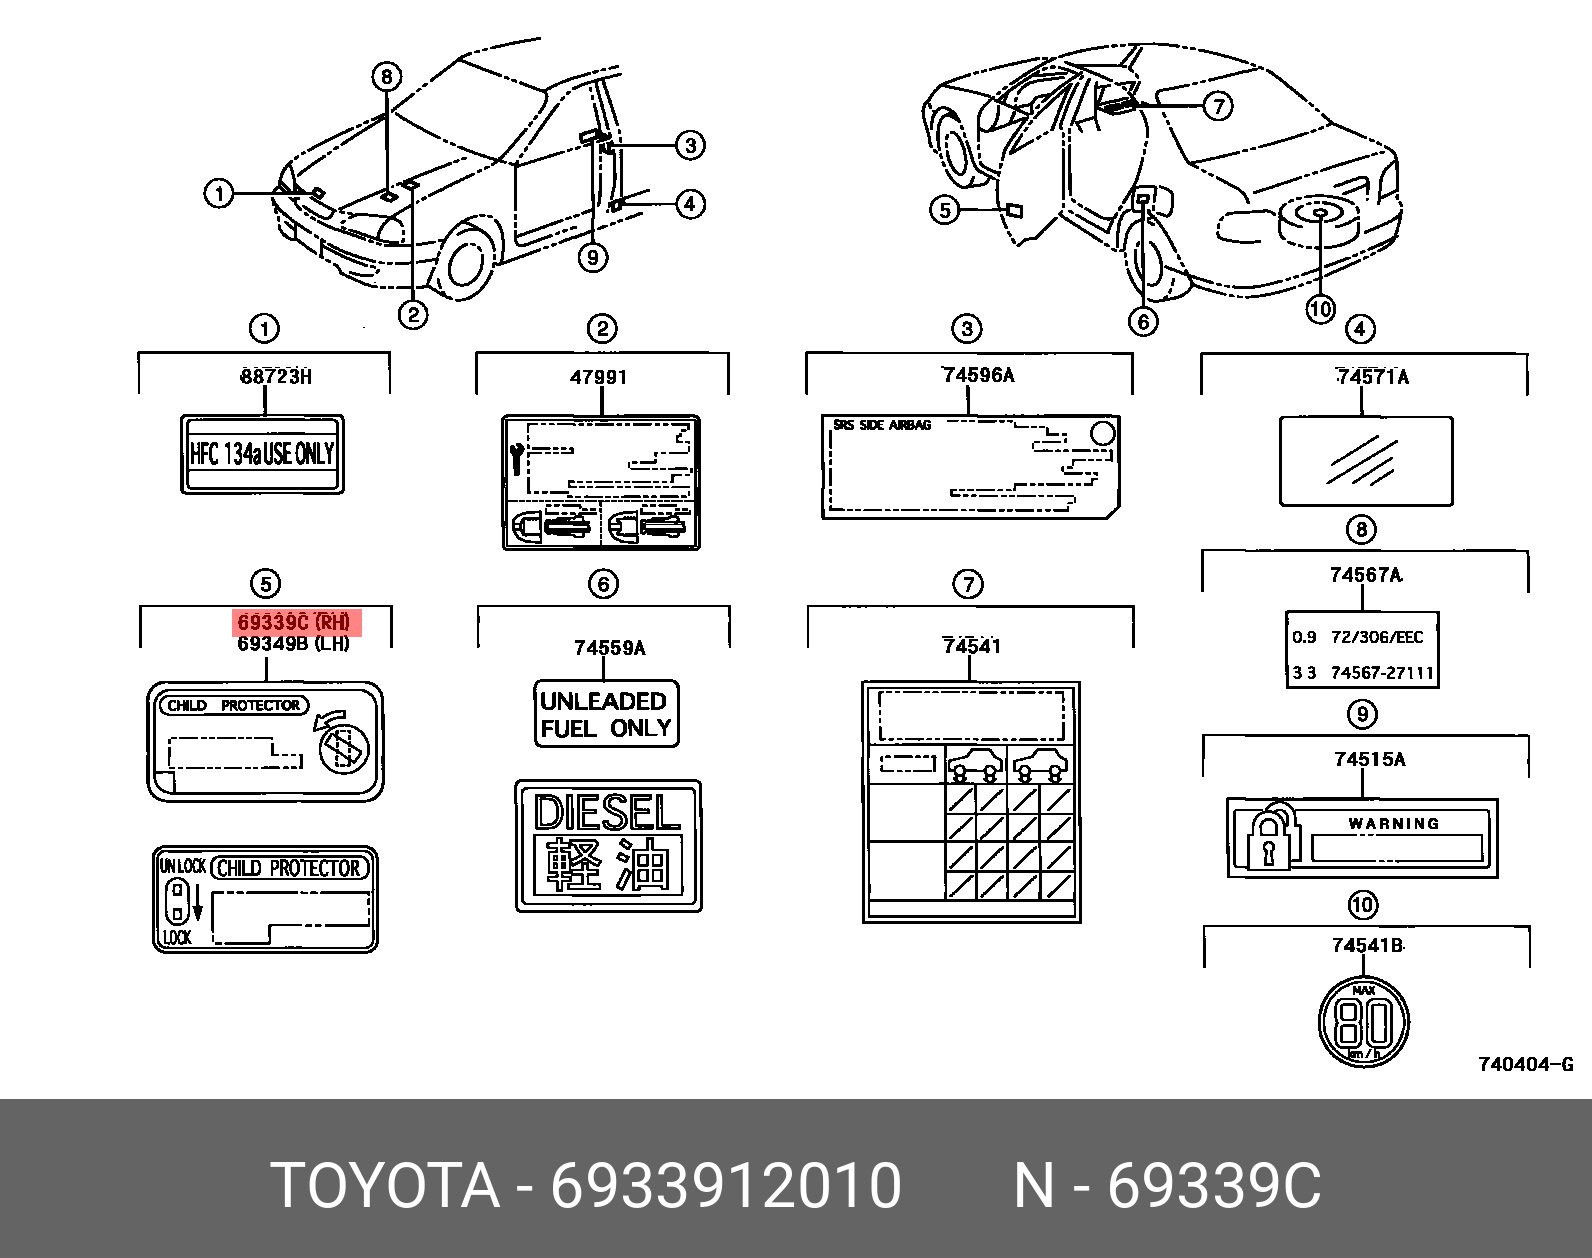 CAMRY 200109 - 200601, LABEL, CHILD PROTECTOR INFORMATION